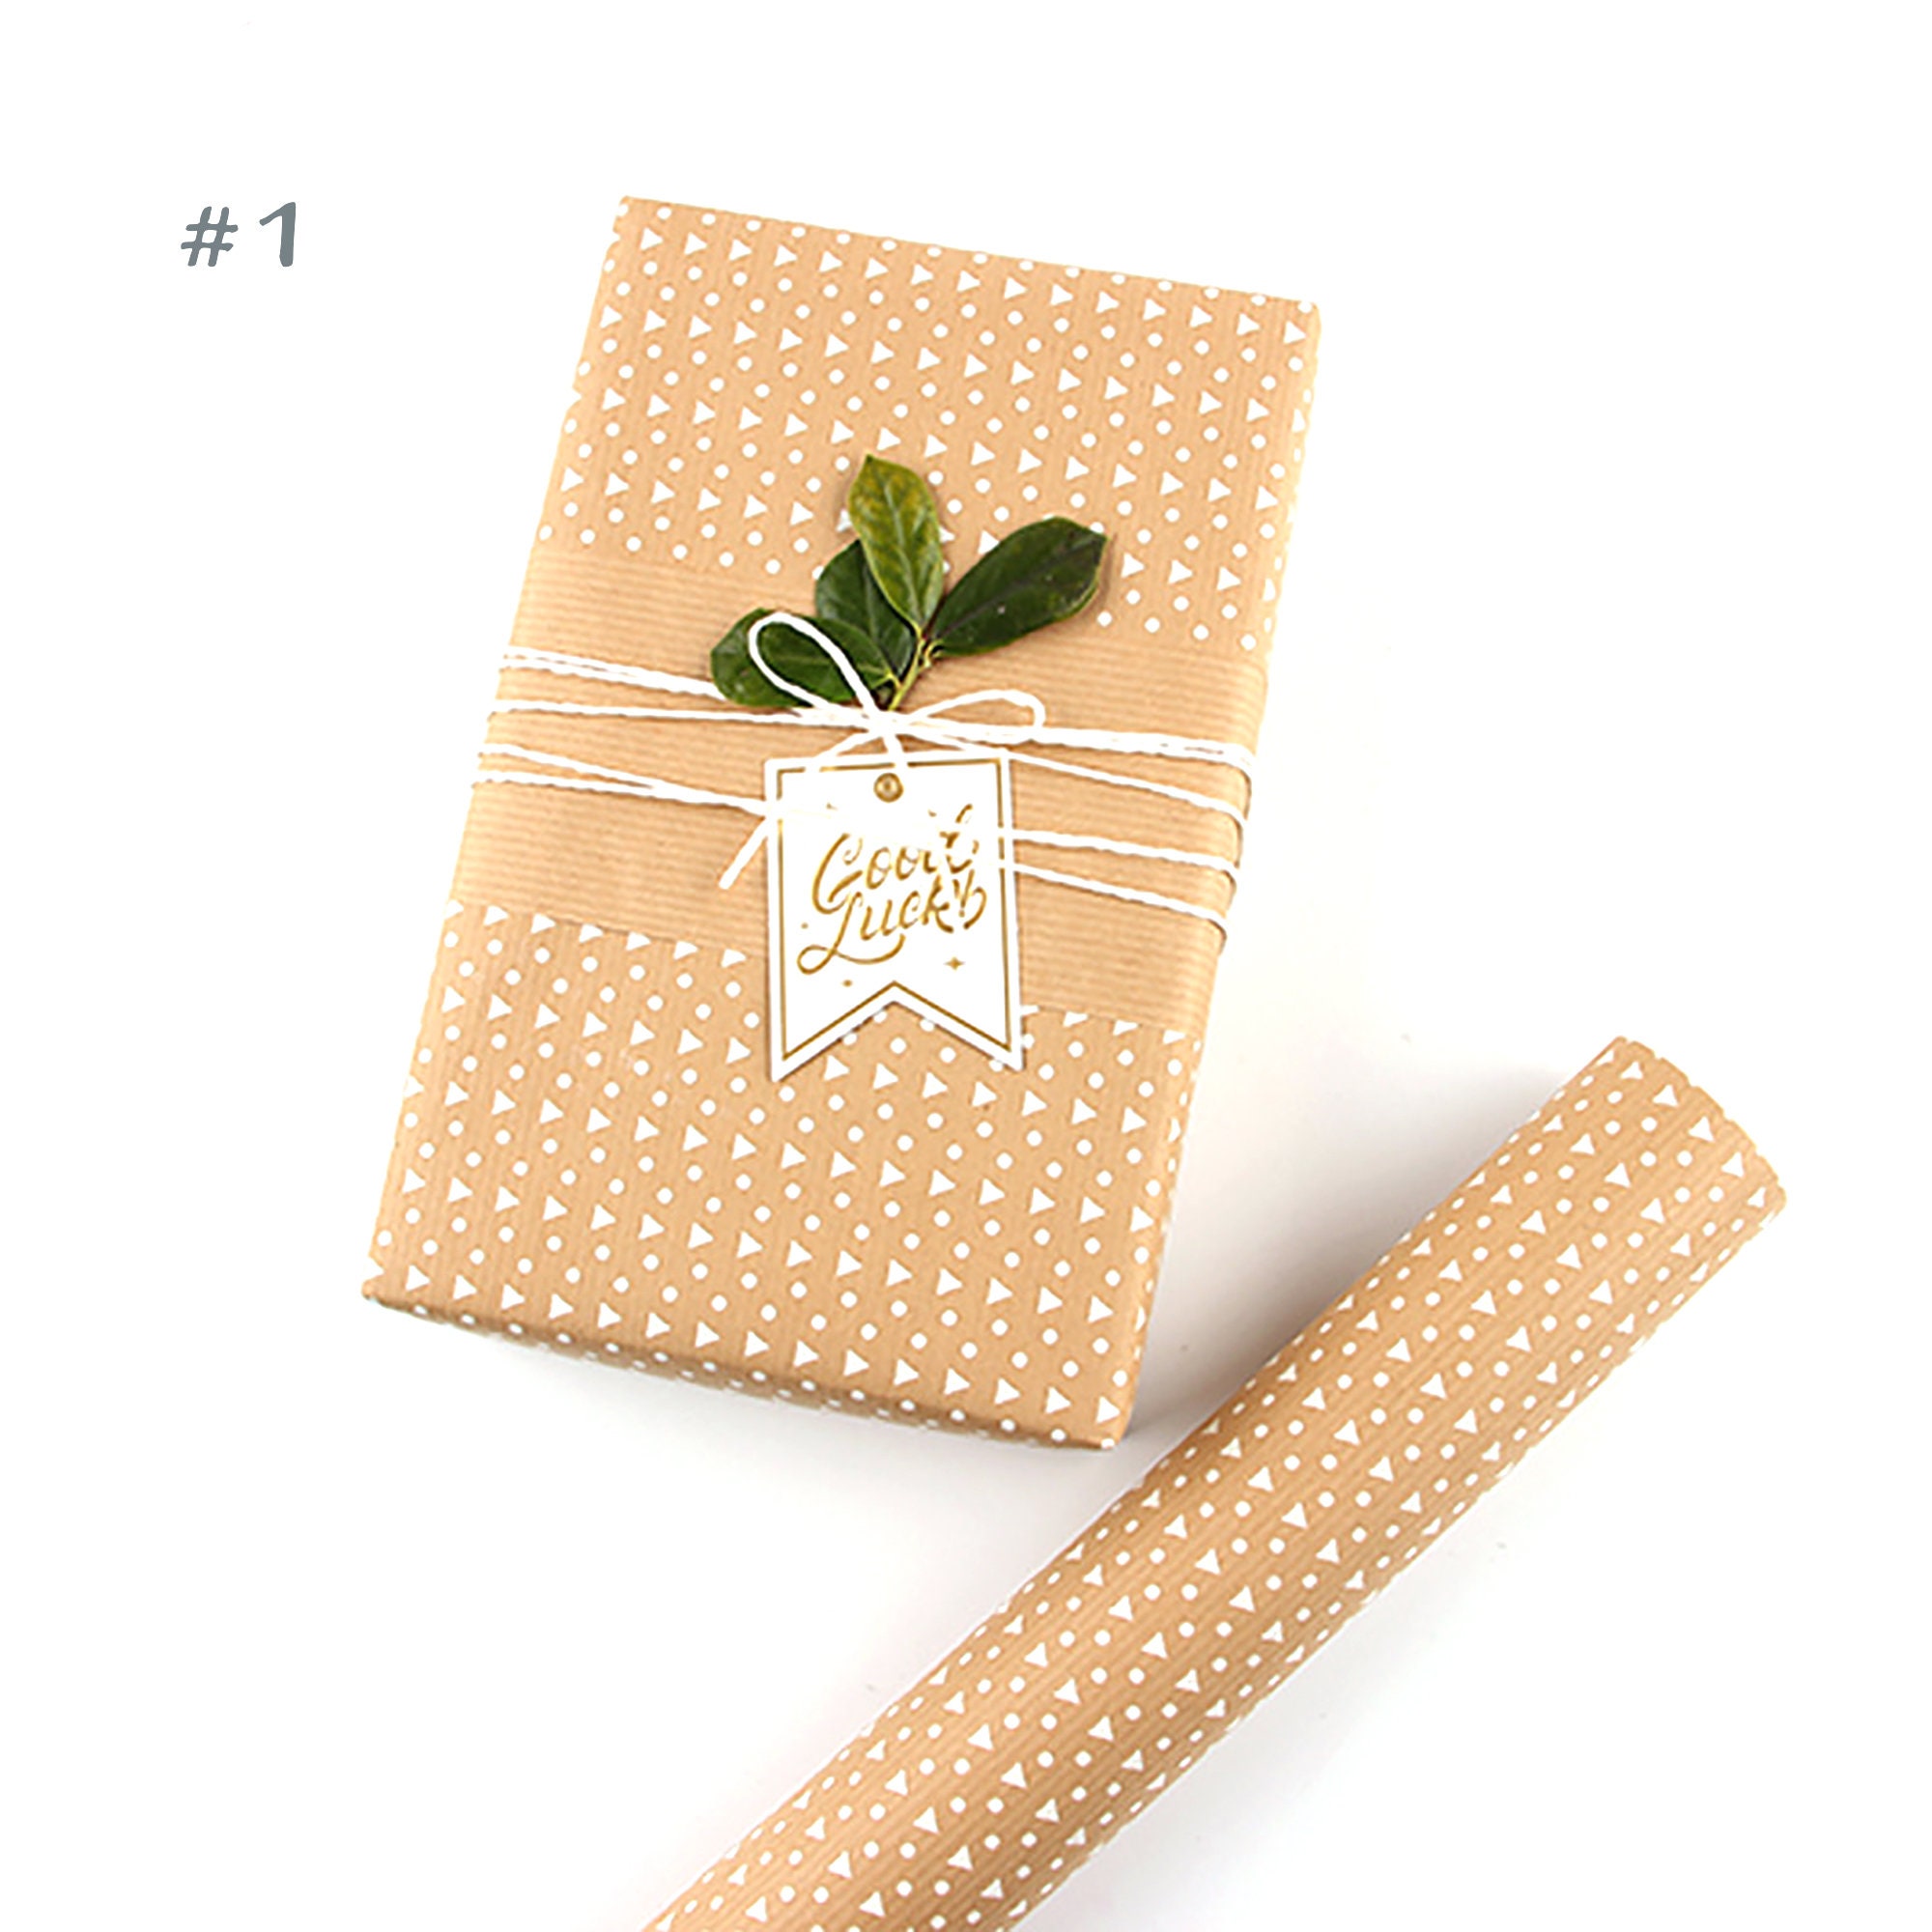 Kraft paper for gift wrapping Ecocarta Botanica 65g m2 roll 70cm x